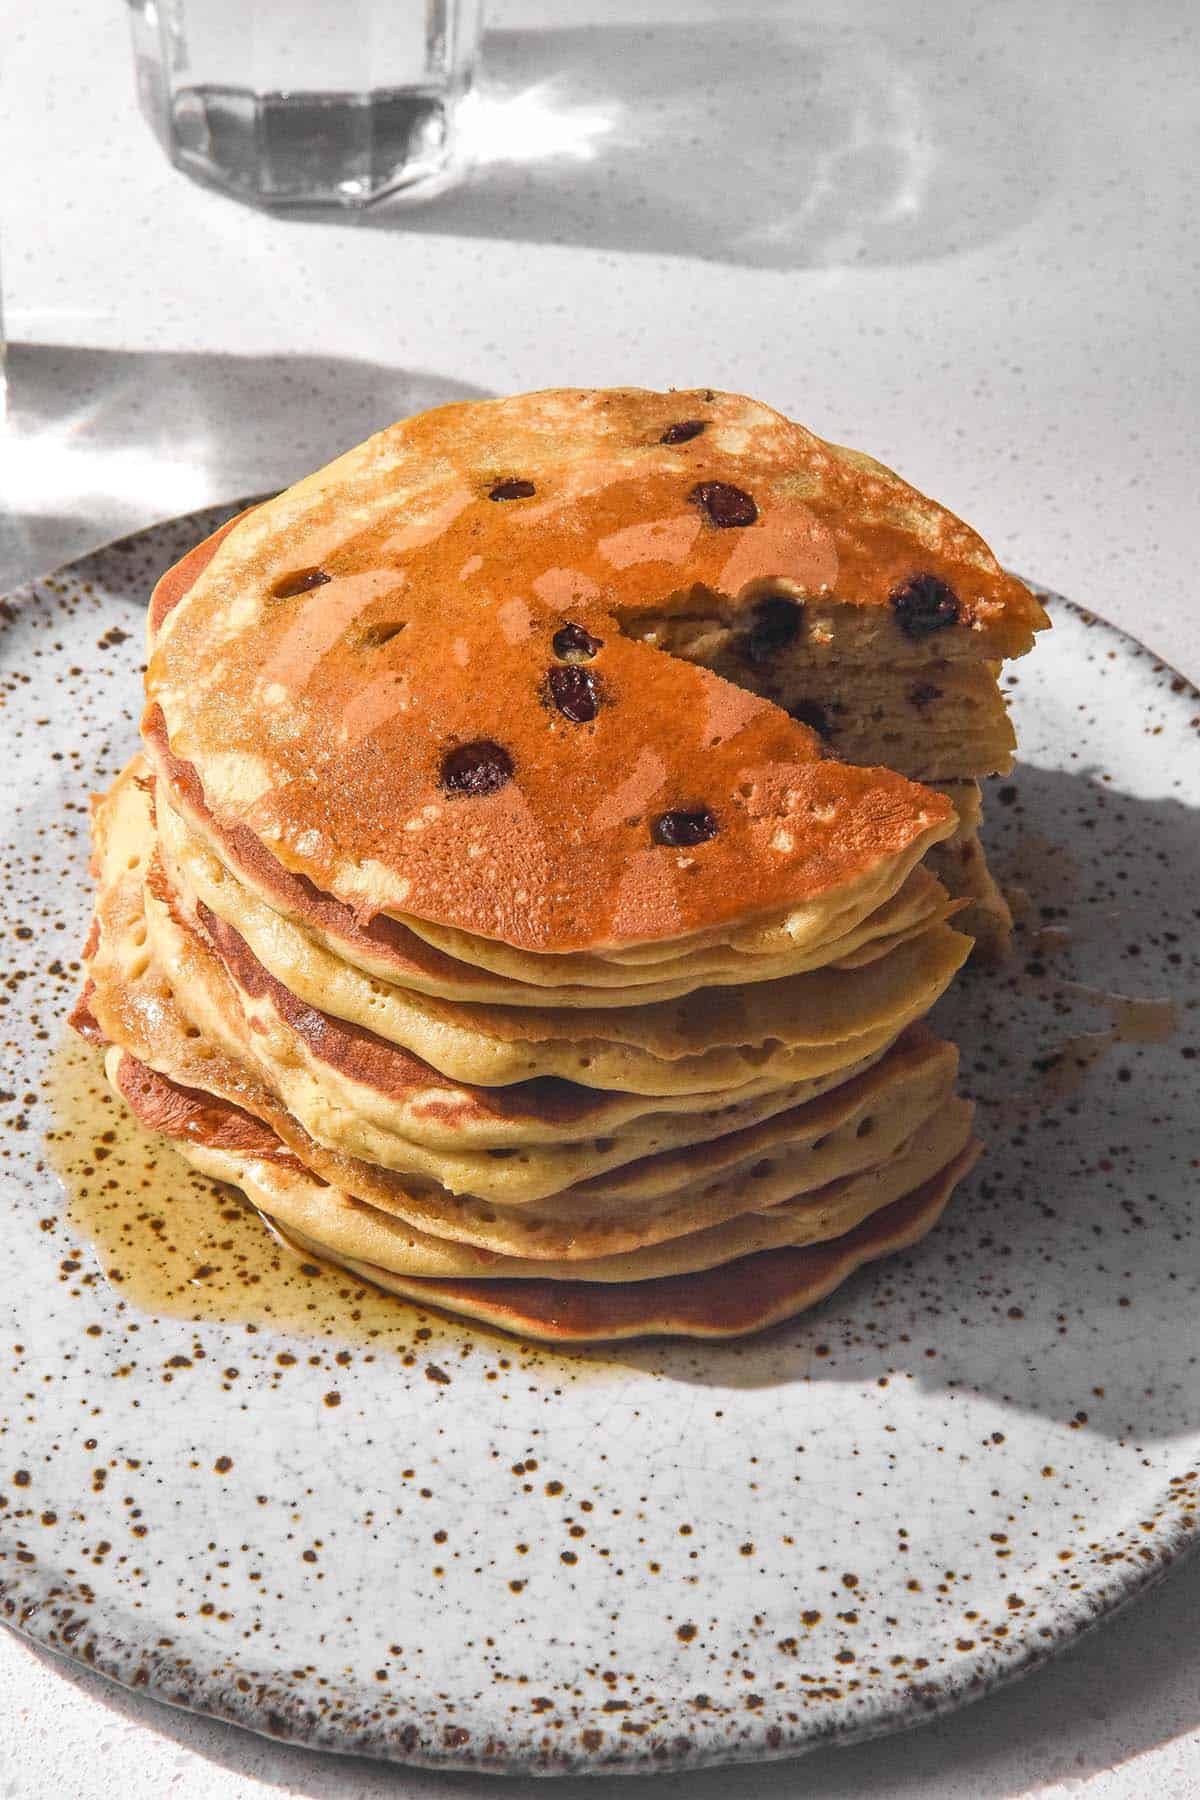 A brightly lit image of a stack of buckwheat flour choc chip pancakes. The slice sits on a white speckled ceramic plate atop a white stone benchtop. Two glasses of water cast shadows onto the benchtop in the background. The pancake stack has been sliced and chocolate chips stud the golden brown pancakes. 